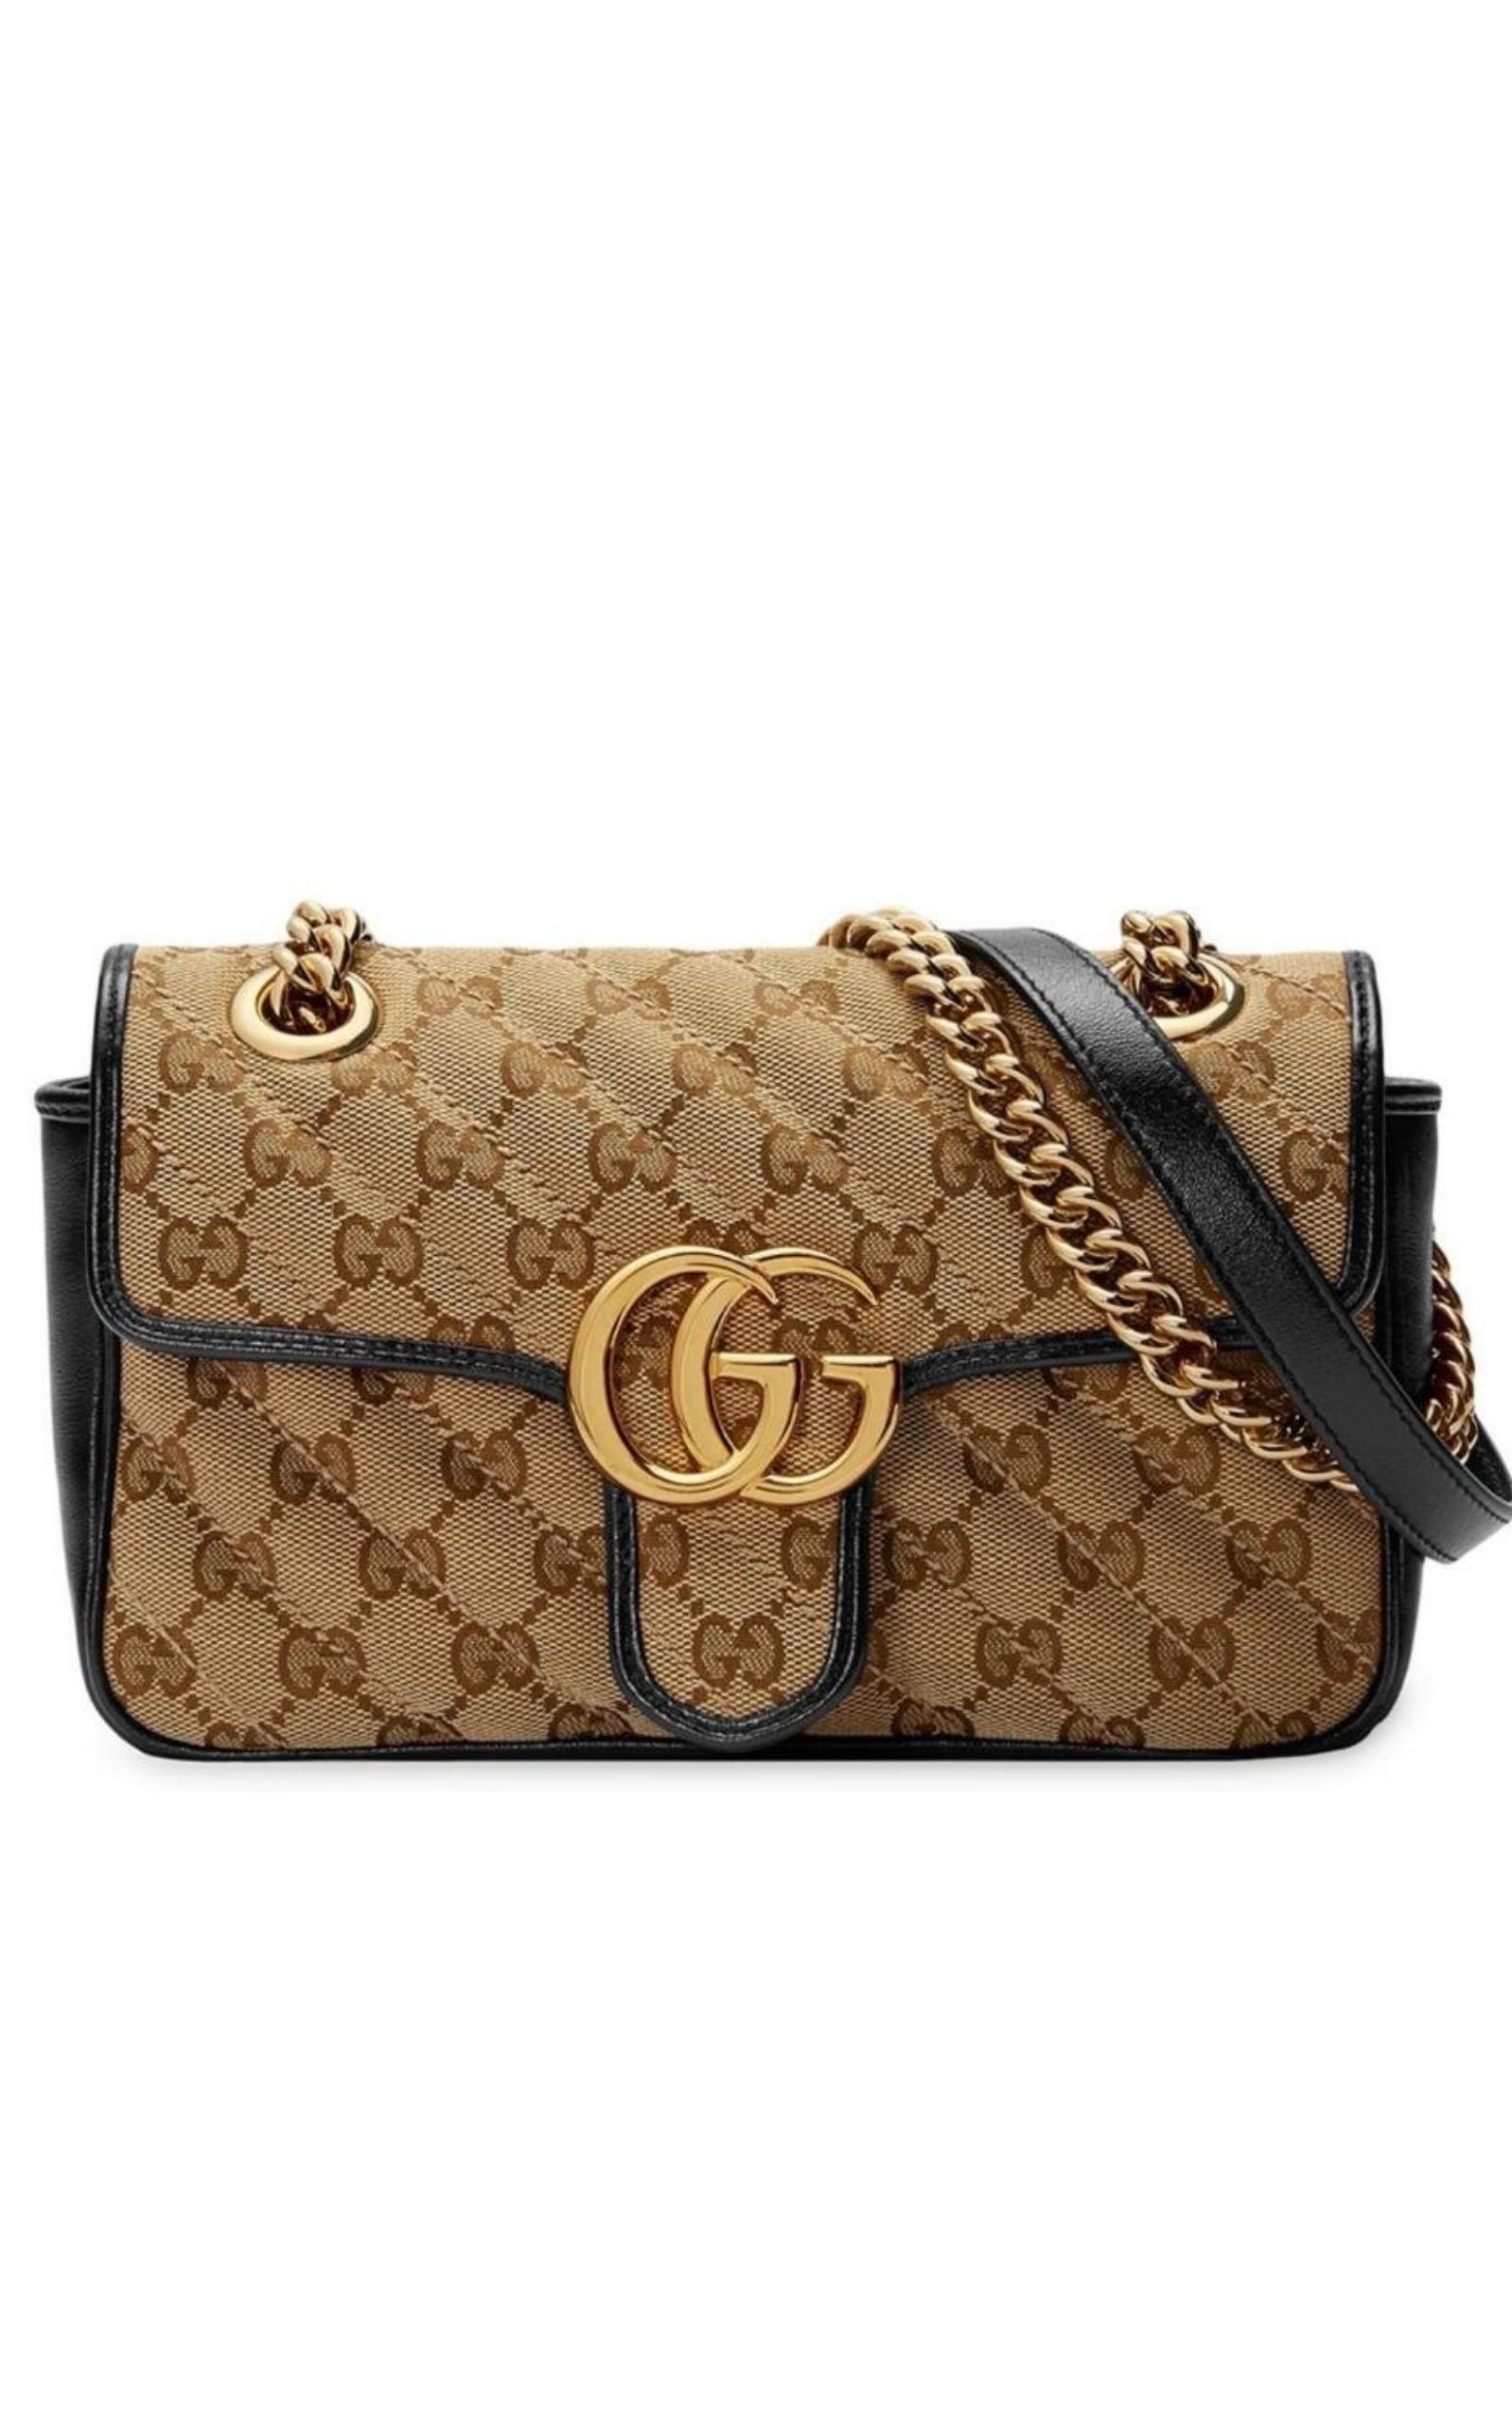 Gucci - GG Marmont Black Leather Flap Small Shoulder Bag